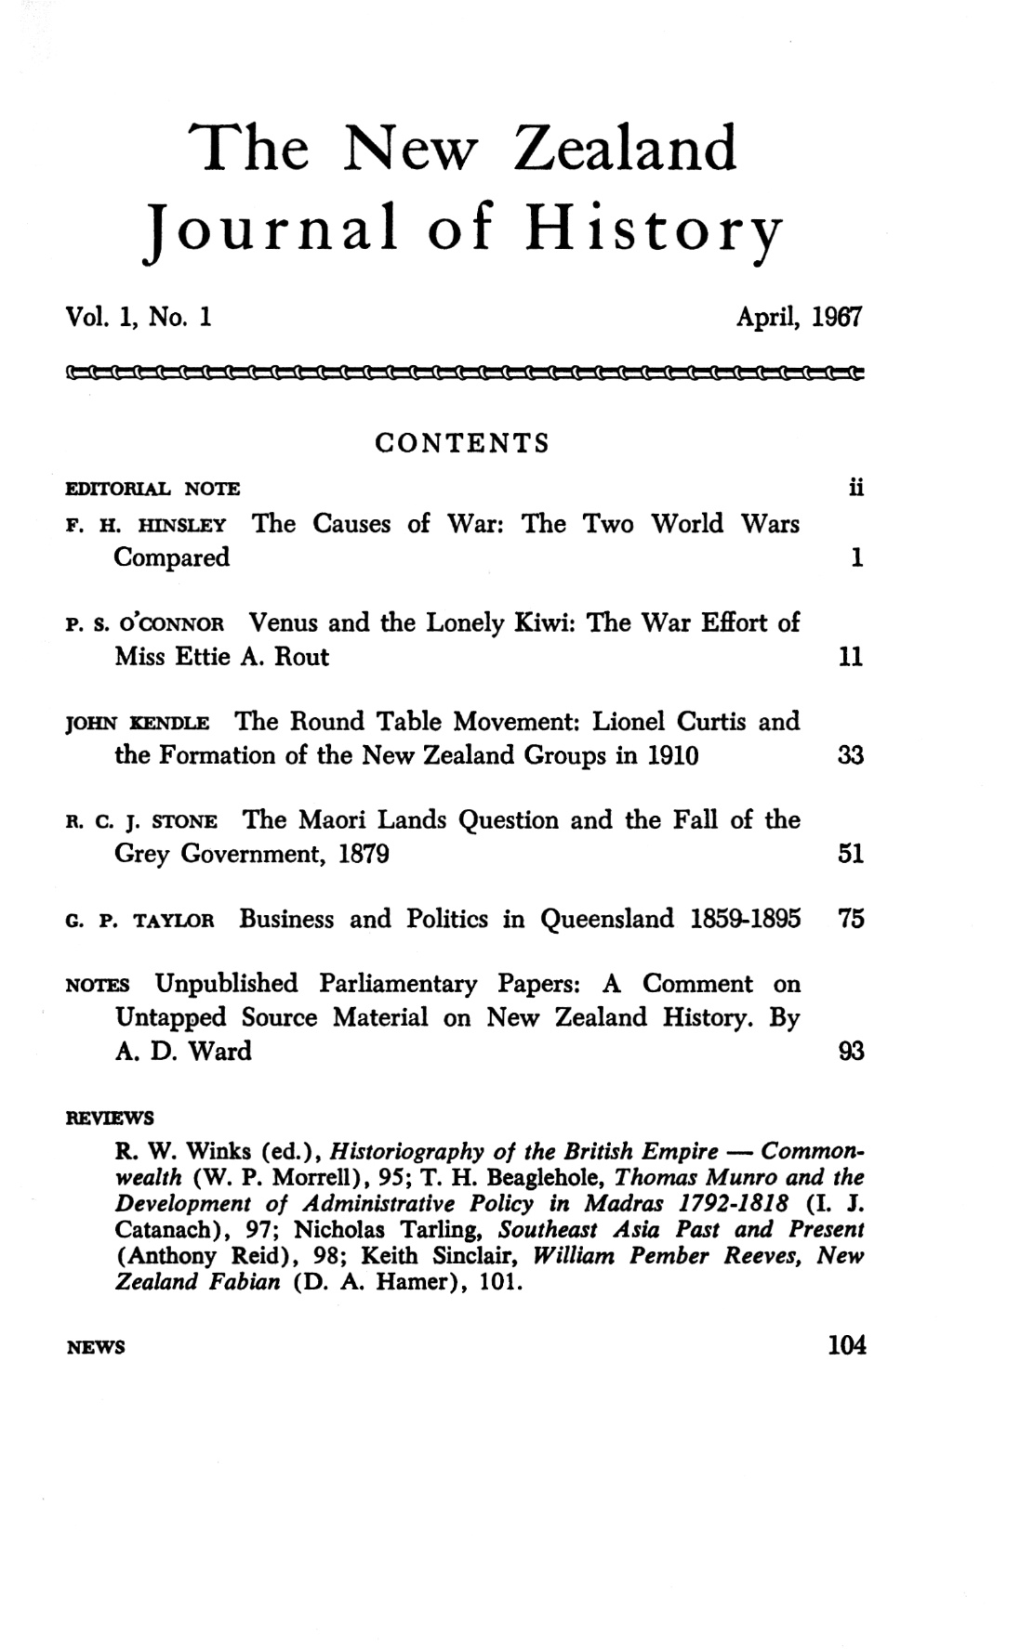 The New Zealand Journal of History Vol